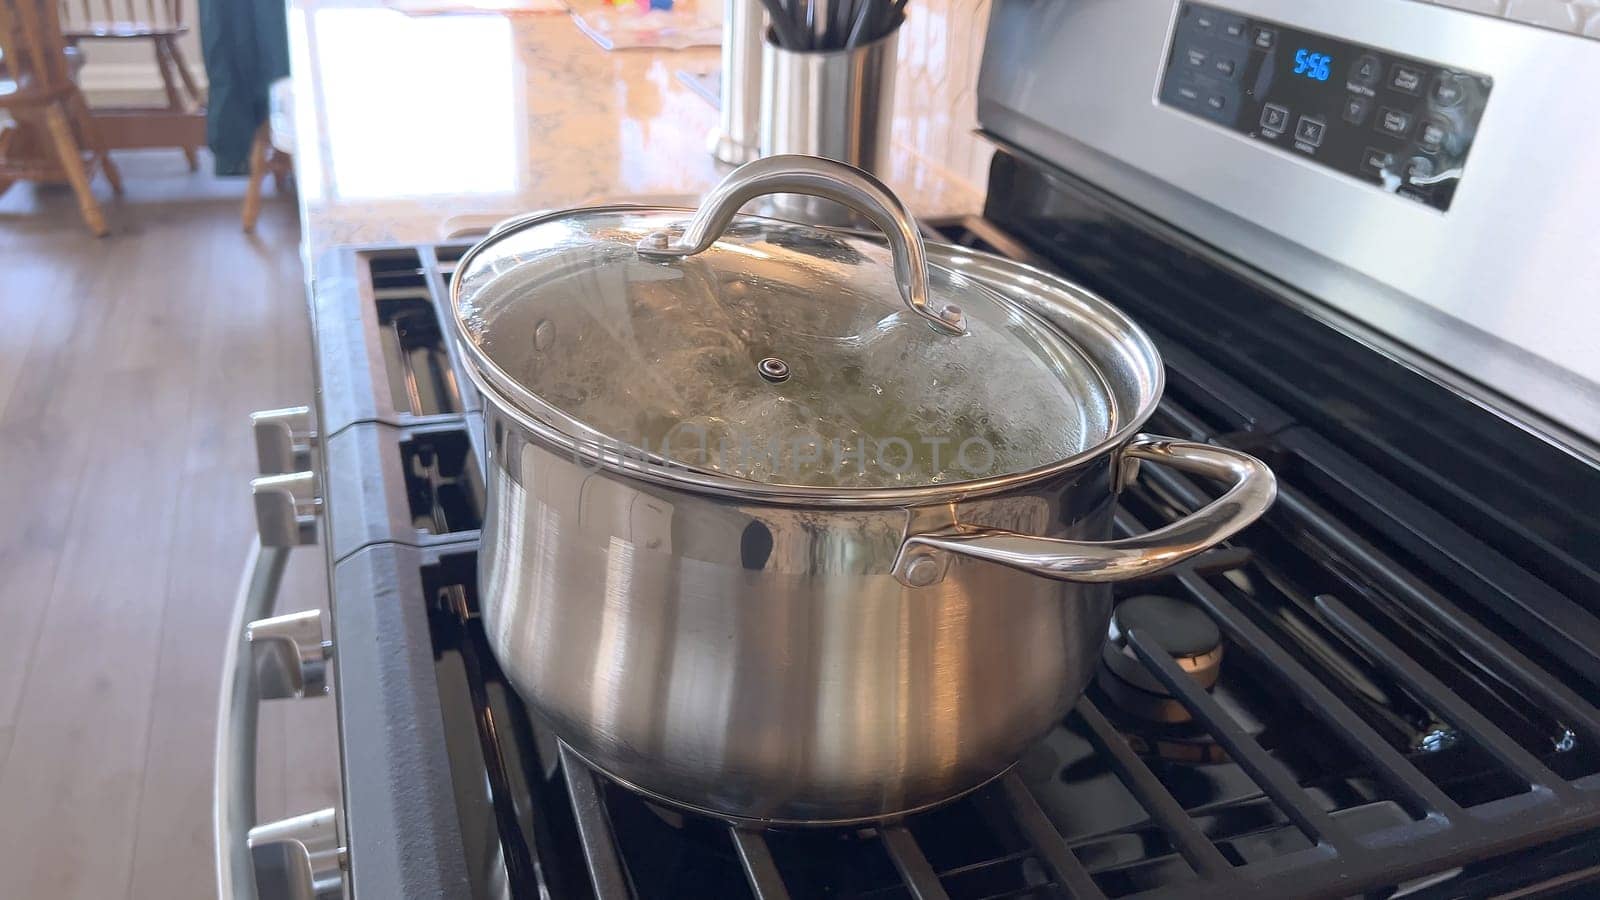 Captured in a home kitchen, this image features a stainless steel pot with boiling water on a gas stove, showcasing a common culinary preparation step with steam rising from the pot under natural light.